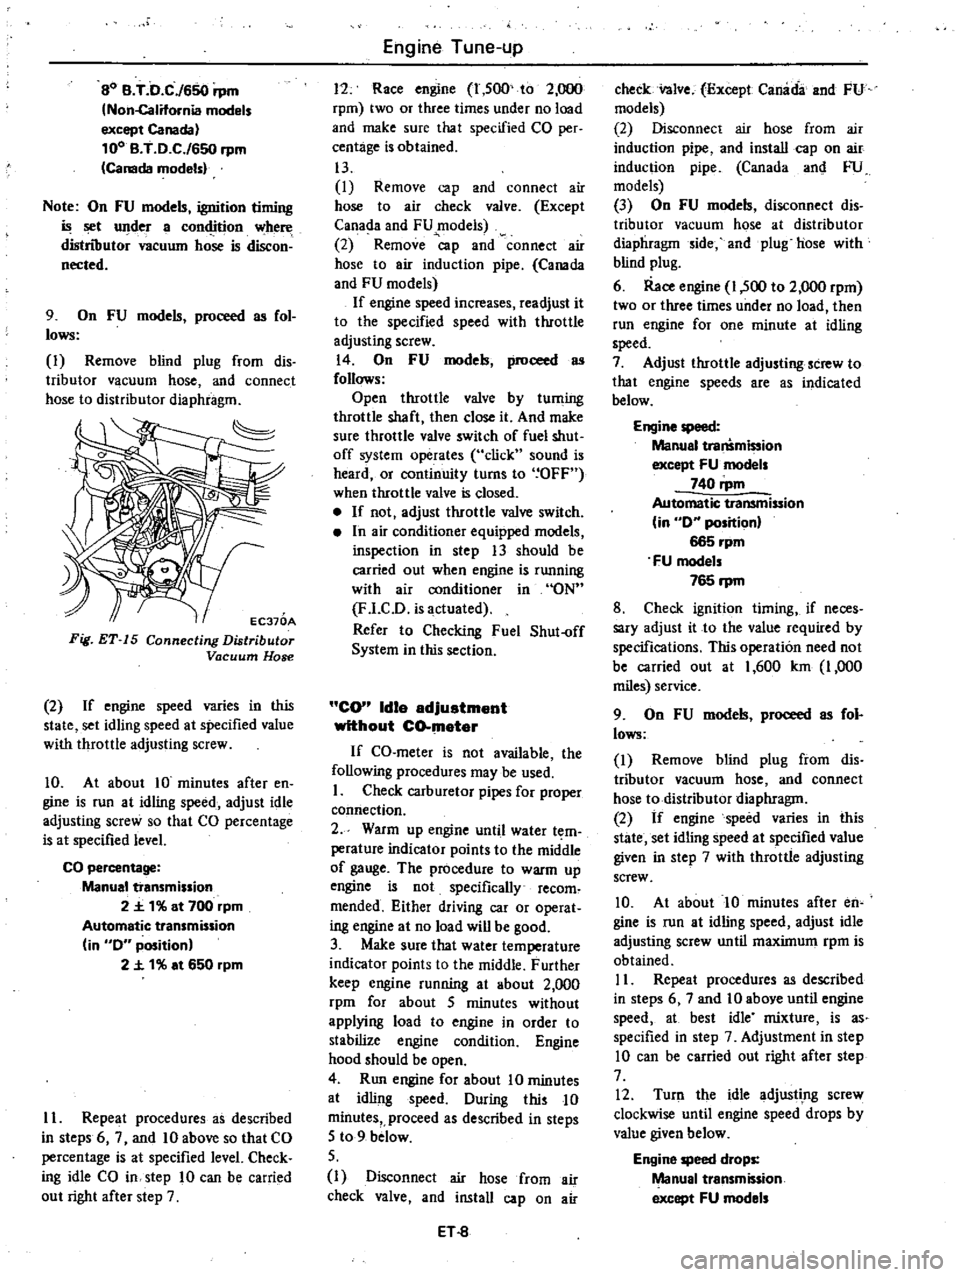 DATSUN 210 1979 Owners Manual 
SO 
B 
T 
D 
C

650

rpm

Non
California 
models

except 
Canada

100 
B 
T 
0 
C 
650

rpm

Canada 
models

Note 
On 
FU

models

ignition 
timing

t 
under 
a

con4ition 
where

distnoutor

vacuum 